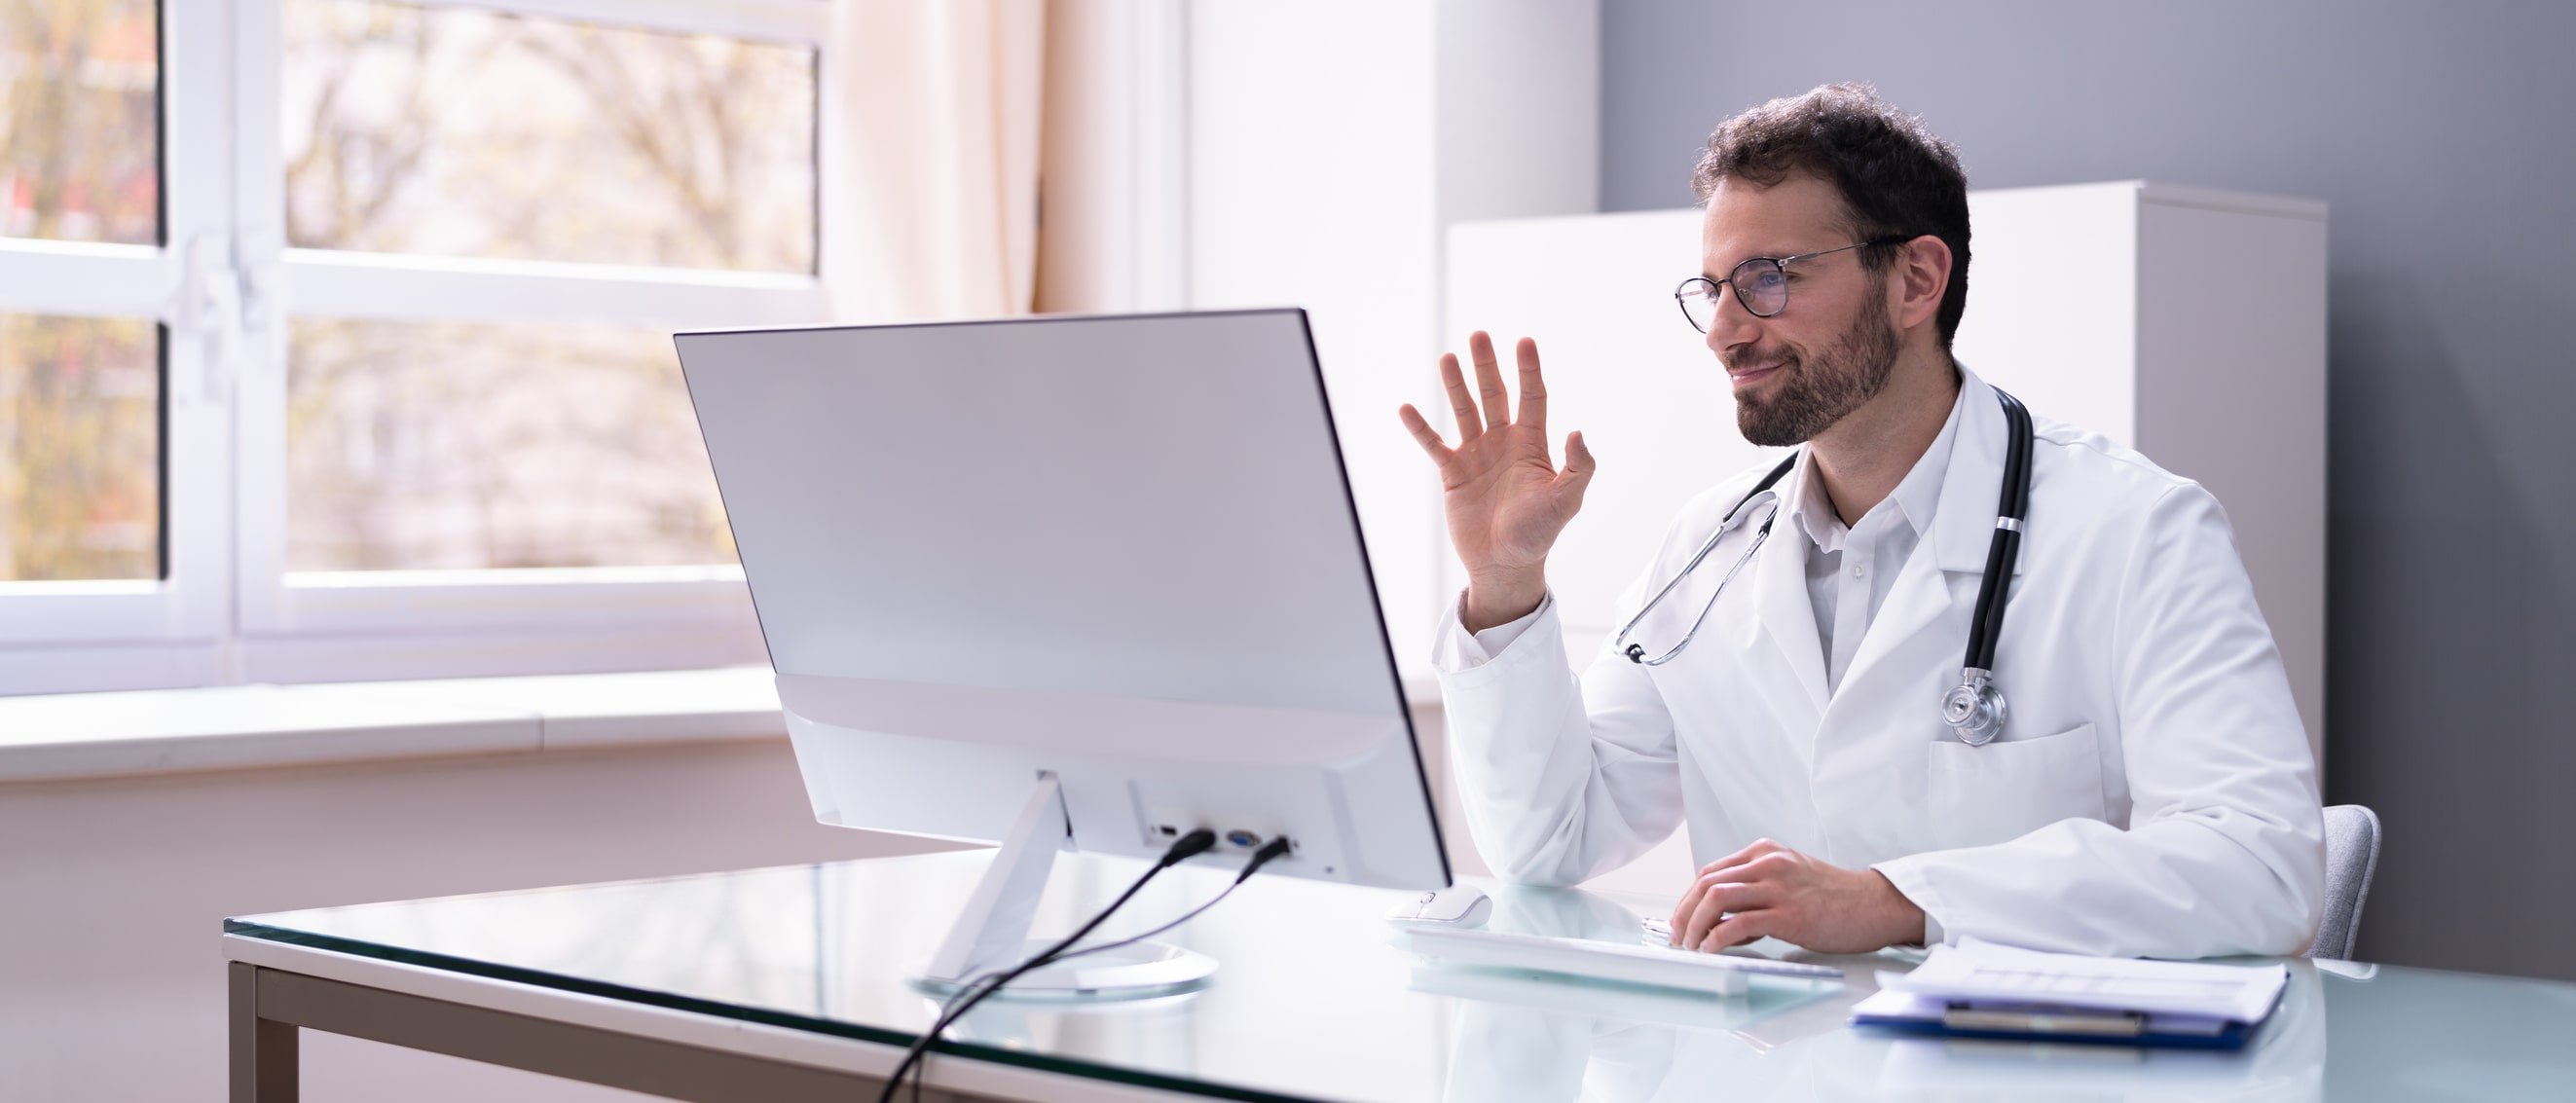 Doctor in white coat having video conference on computer